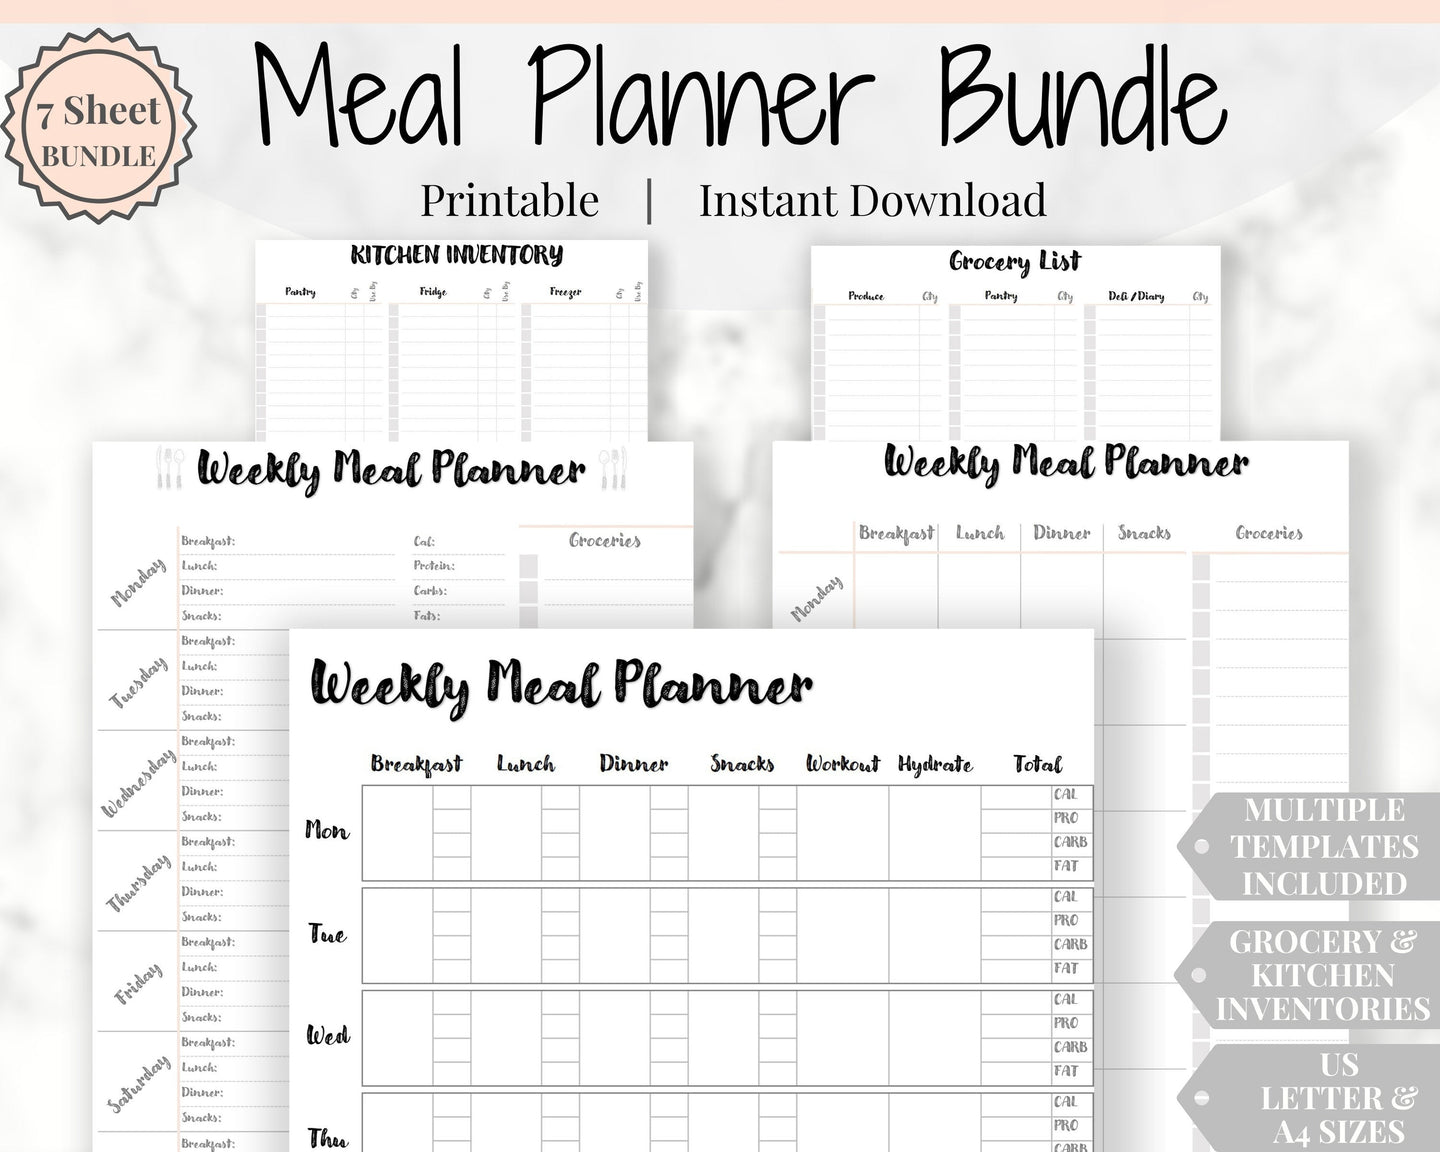 Meal Planner, Food Diary, Fitness Planner with Grocery List. Weight loss & Food Journal. Weekly meal planner, workout planner, diet food log | Style 1